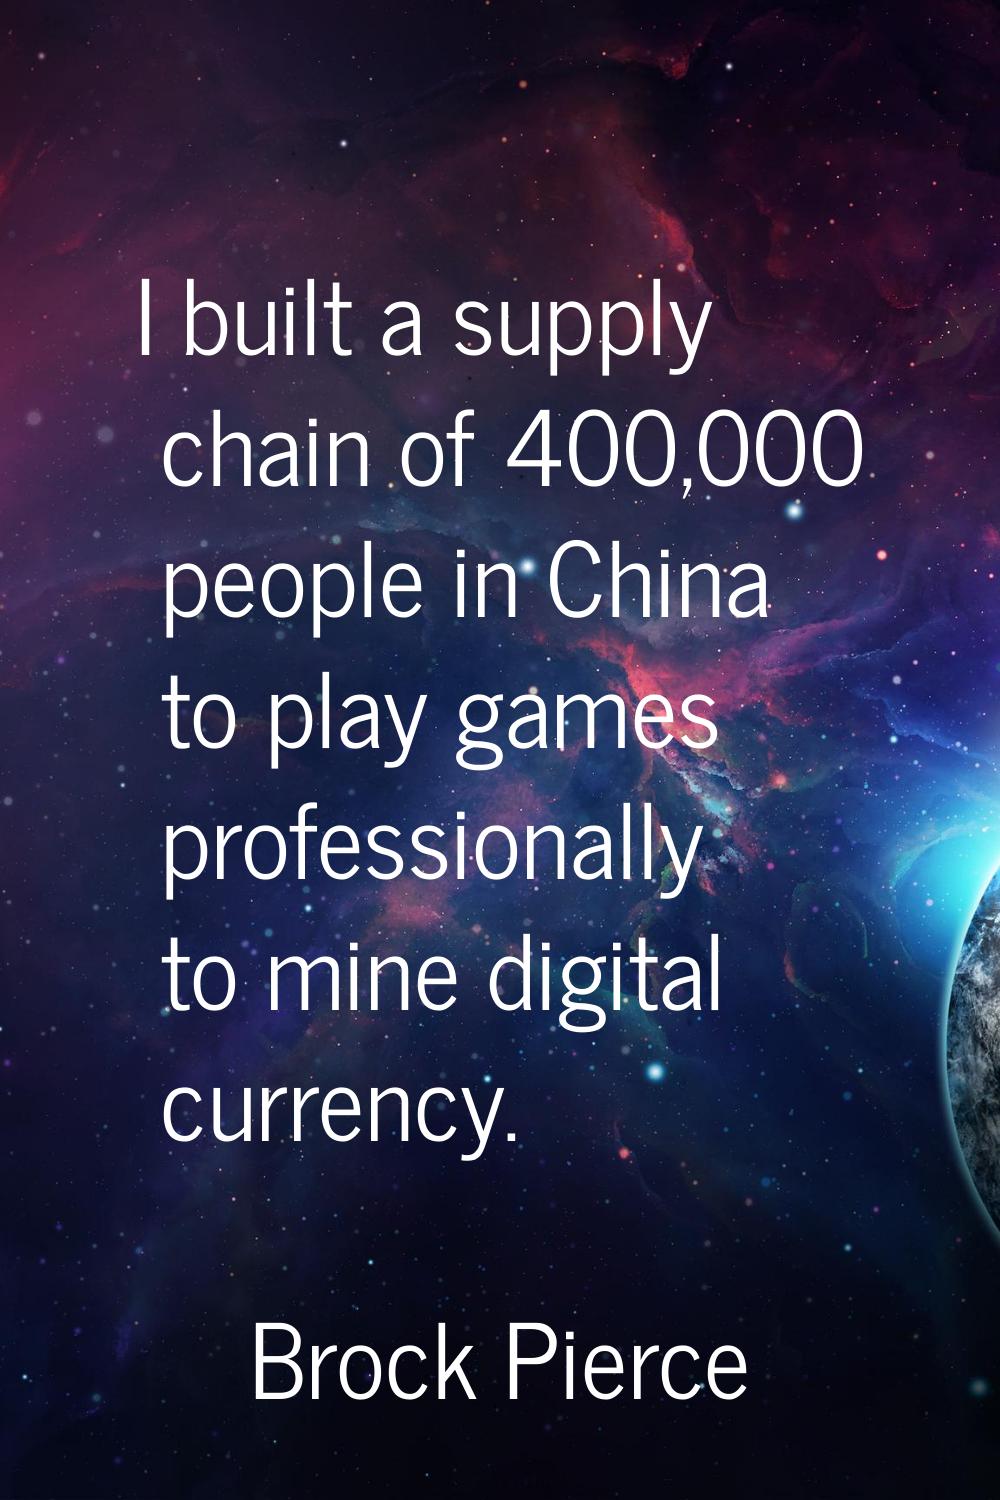 I built a supply chain of 400,000 people in China to play games professionally to mine digital curr